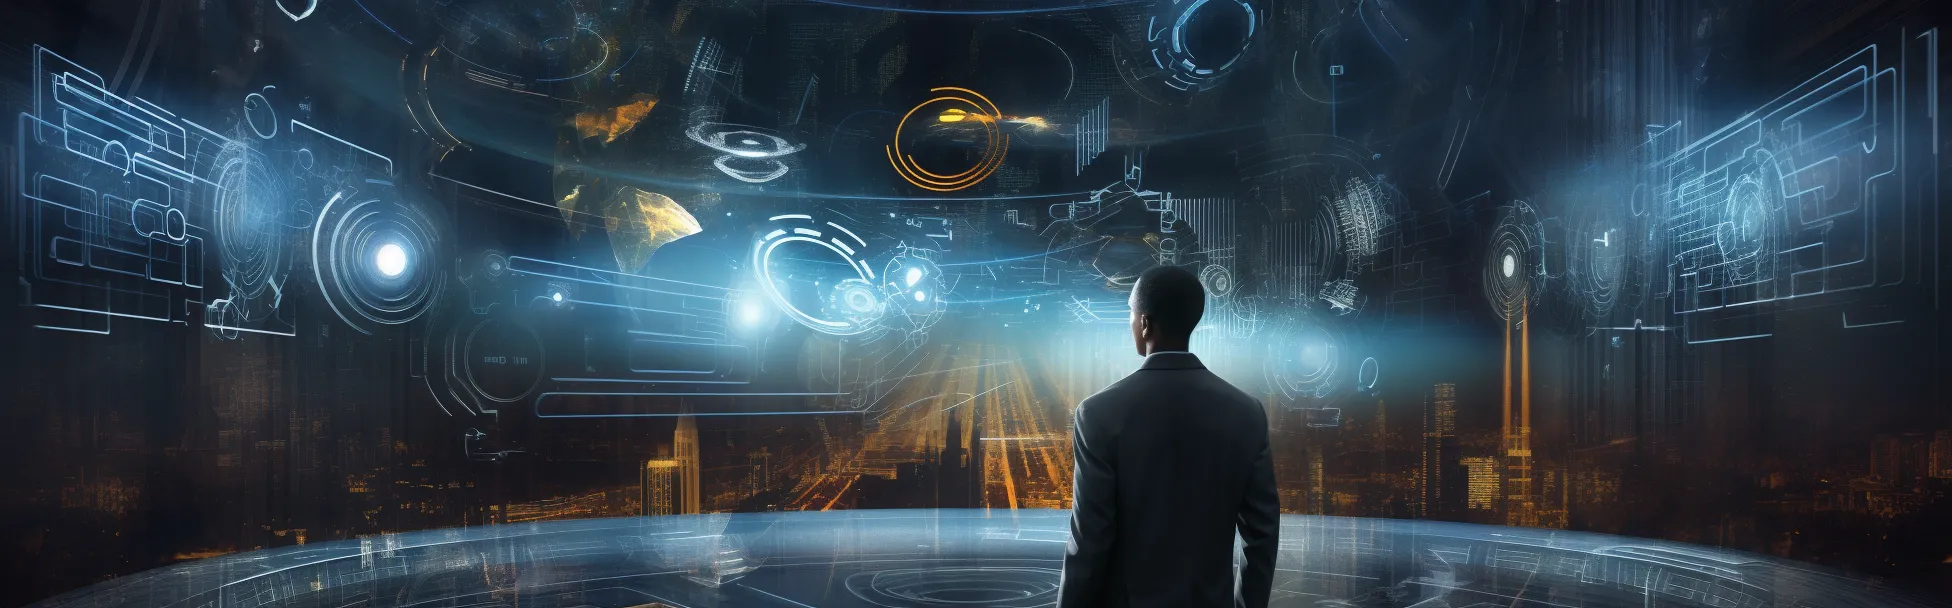 A panoramic image of a man viewed from behind, overlooking a futuristic digital interface with holographic displays, including various technological and scientific diagrams, against a backdrop of a cityscape at night.